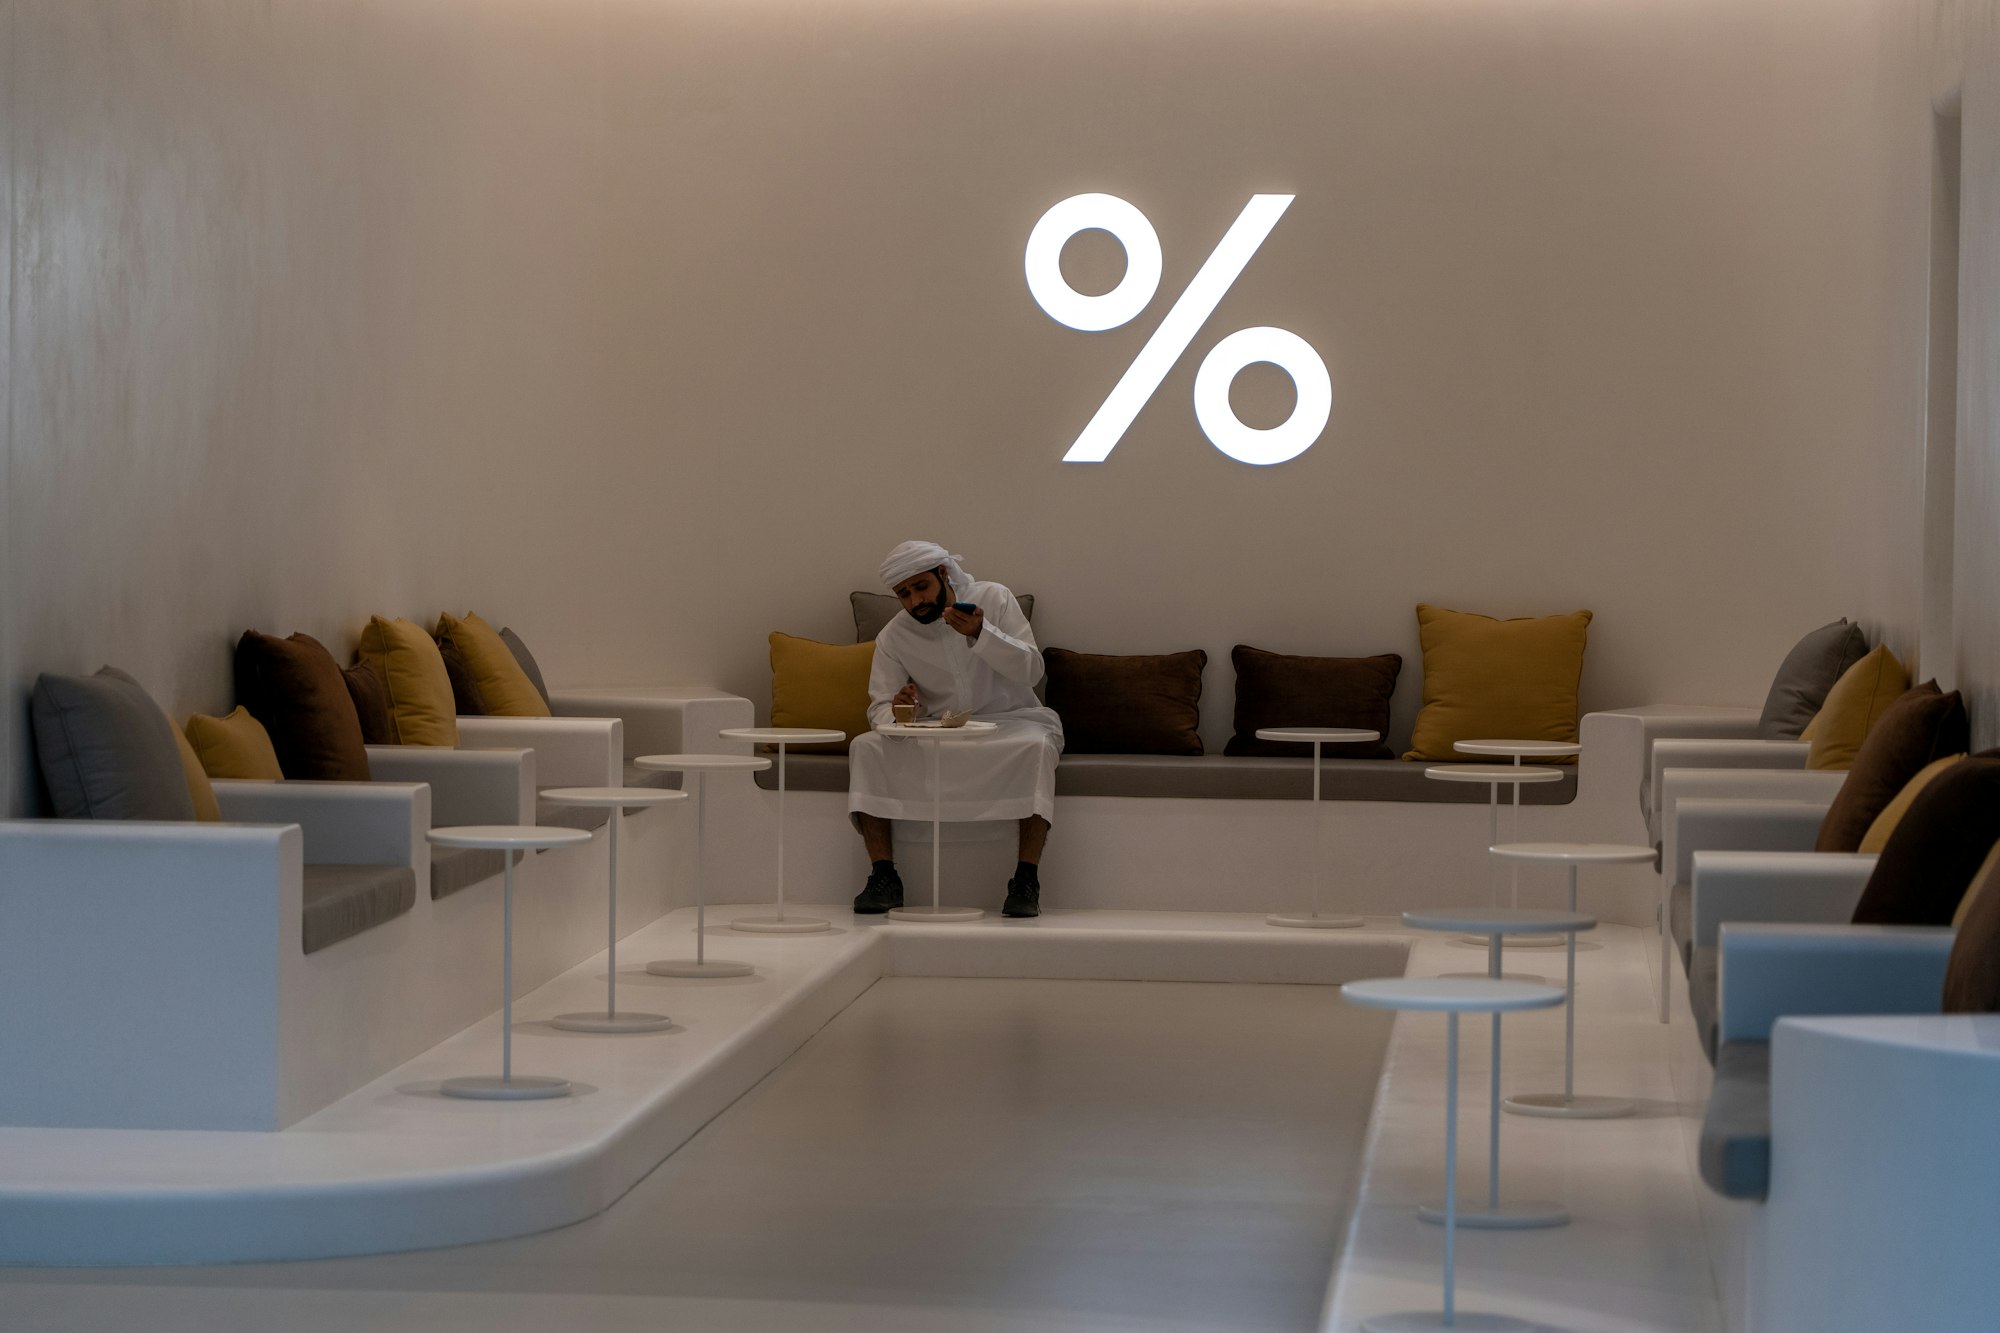 A man having a coffee in one of the coffee shops in the Dubai Mall, UAE.  I loved the white of his traditional outfit, against the white of the floor, tables and percentage symbol.